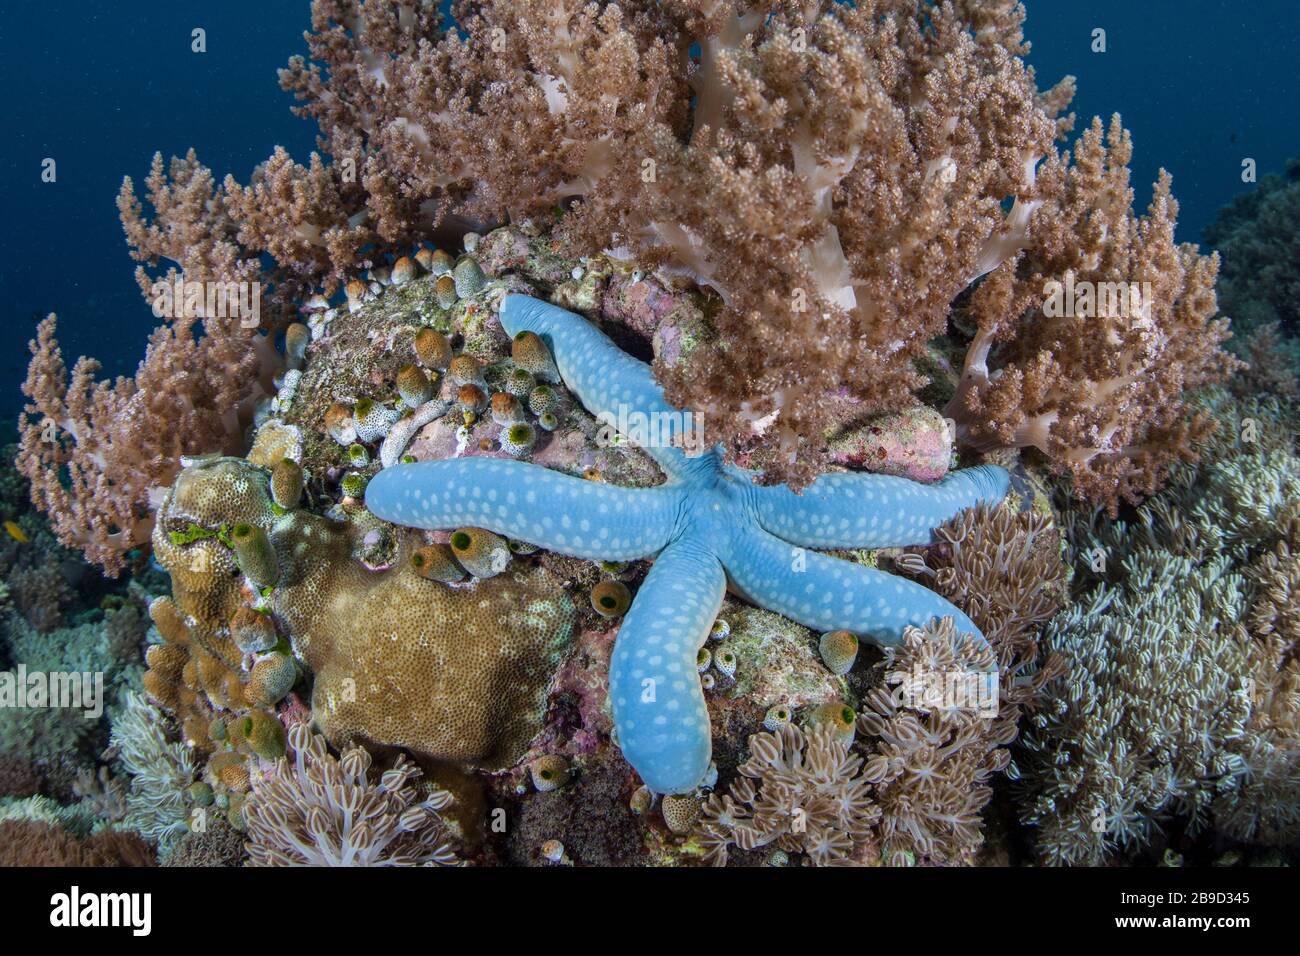 A blue sea star, Linkia laevigata, clings to a healthy coral reef. Stock Photo